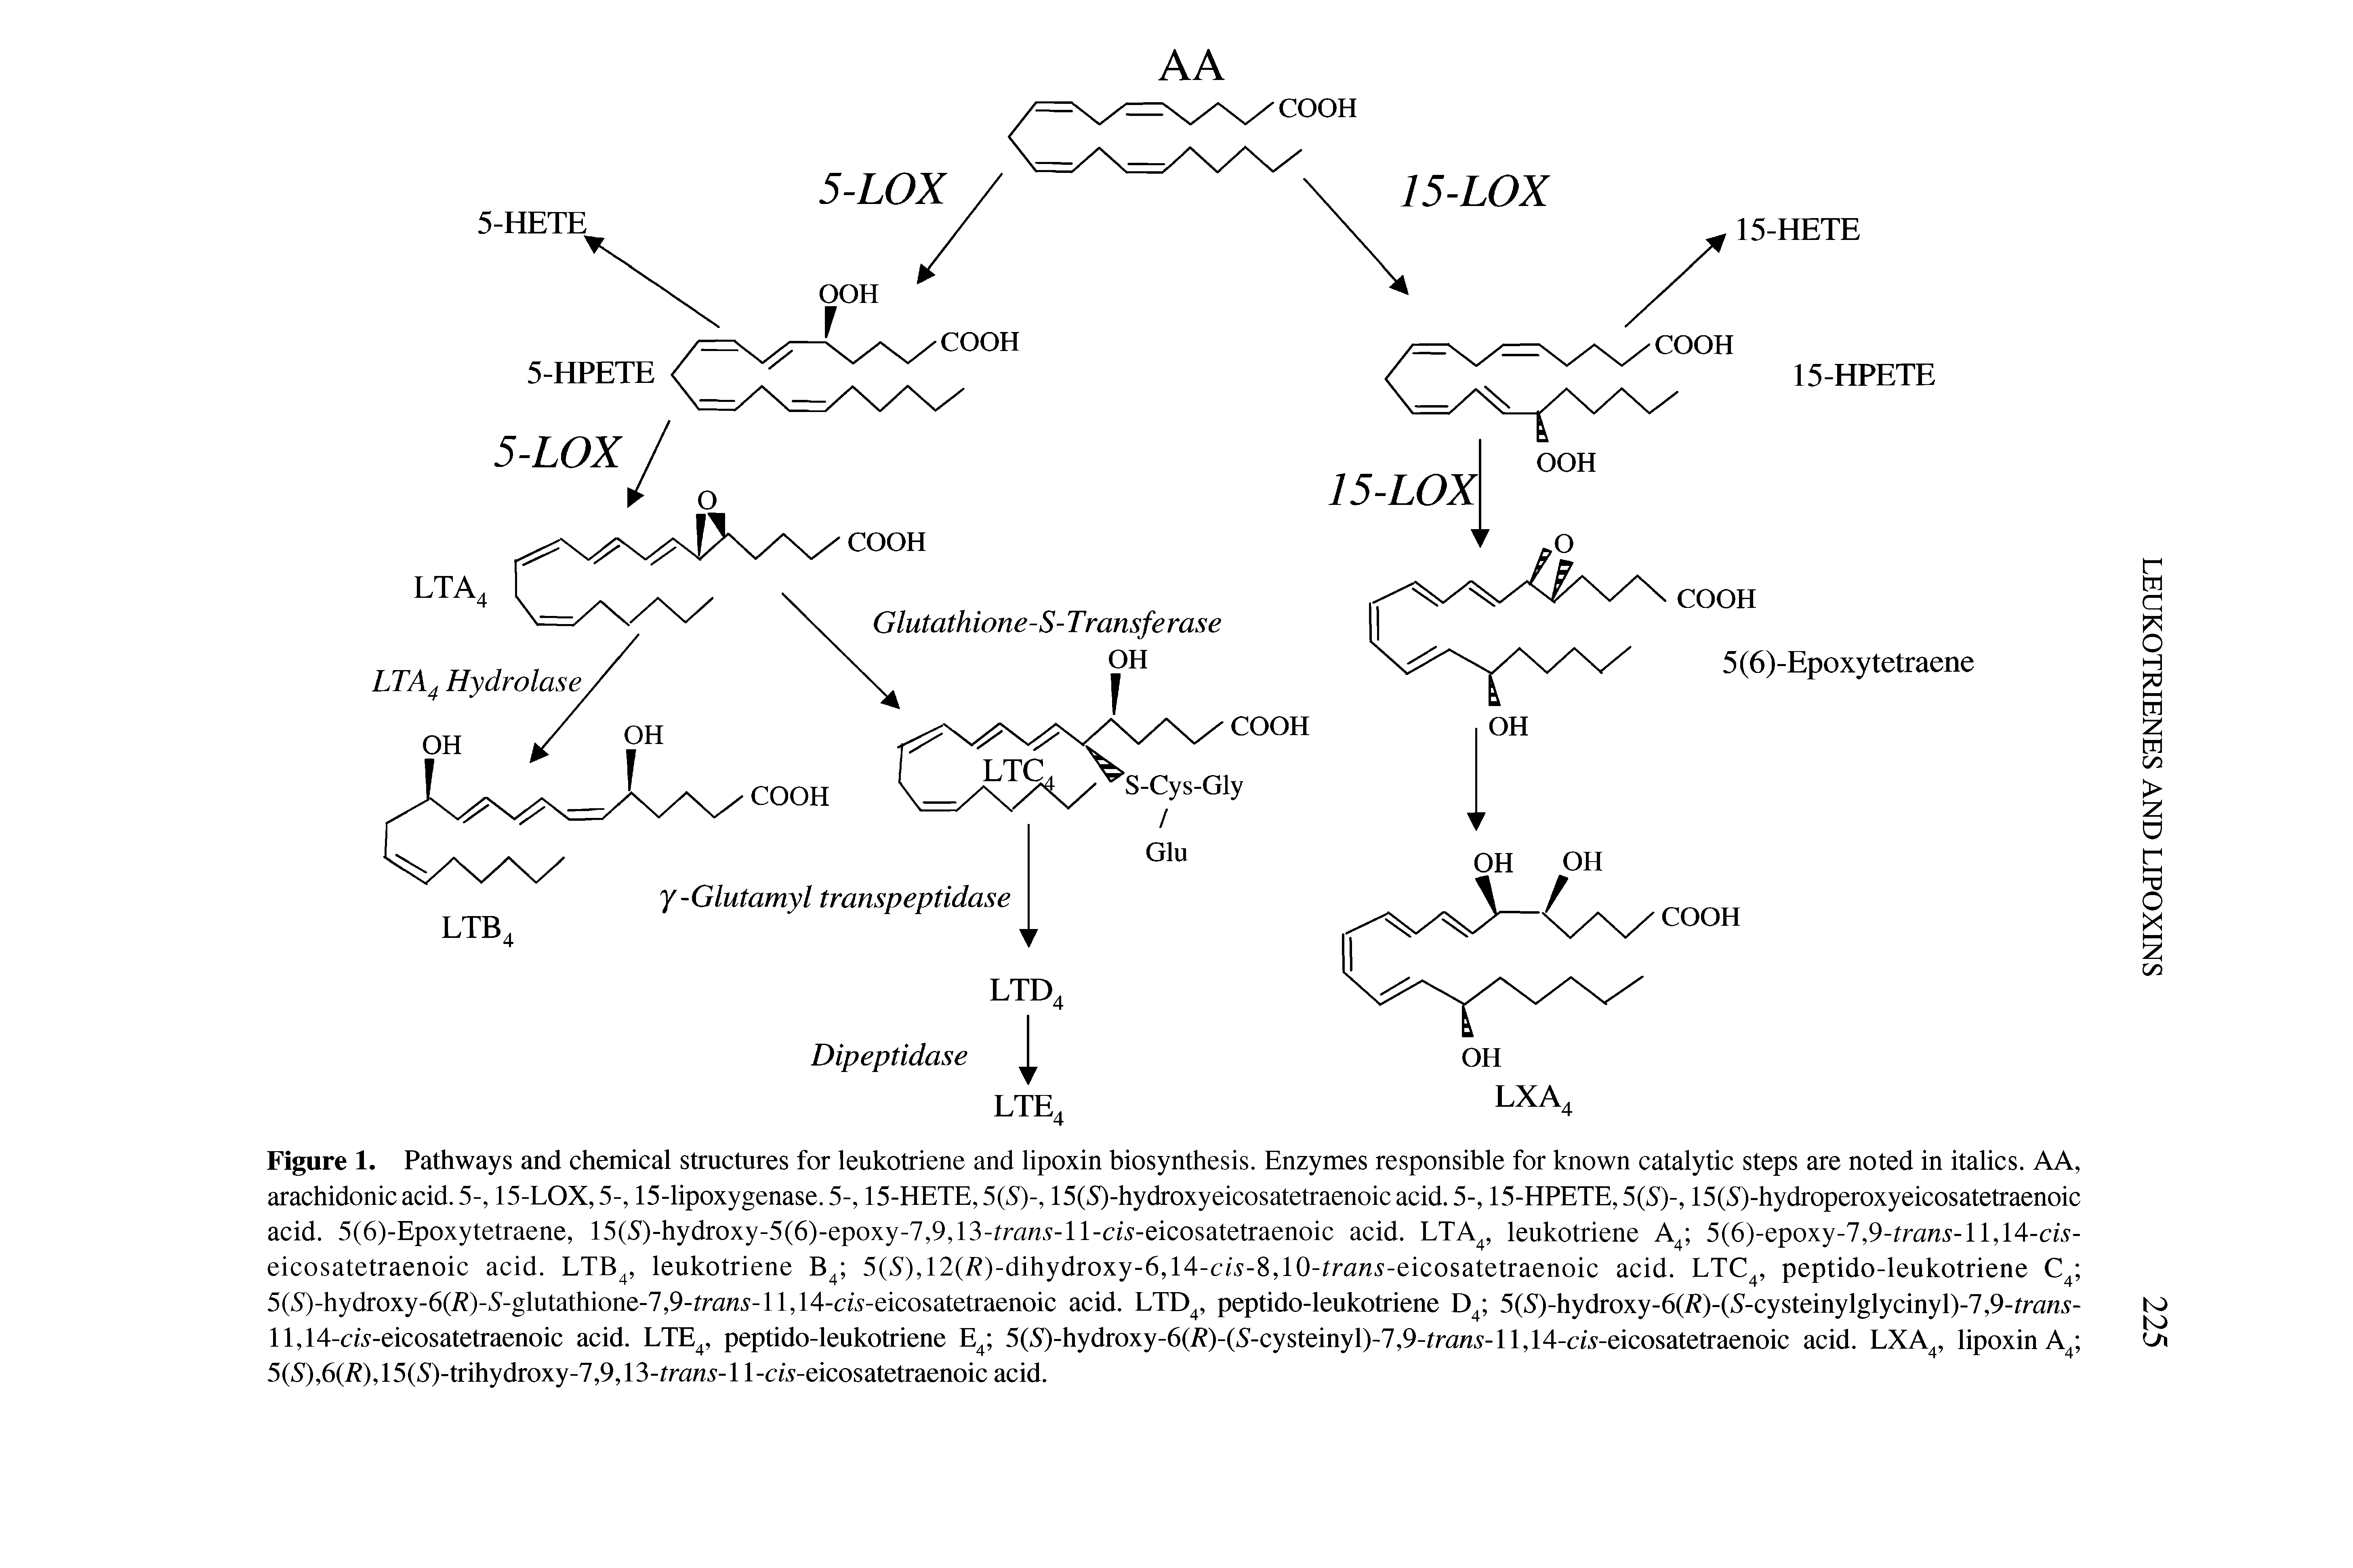 Figure 1. Pathways and chemical structures for leukotriene and lipoxin biosynthesis. Enzymes responsible for known catalytic steps are noted in italics. AA, arachidonicacid.5-, 15-LOX, 5-, 15-lipoxygenase. 5-, 15-HETE, 5(5 )-, 15(5)-hydroxyeicosatetraenoicacid.5-, 15-HPETE, 5(5 )-, 15(5 )-hydroperoxyeicosatetraenoic acid. 5(6)-Epoxytetraene, 15(5)-hydroxy-5(6)-epoxy-7,9,13- ra. -ll-c/5-eicosatetraenoic acid. LTA, leukotriene A 5(6)-epoxy-7,9- rafZ5-ll,14-cw-eicosatetraenoic acid. LTB, leukotriene 5(5 ),12(/ )-dihydroxy-6,14-cw-8,10- rfl .y-eicosatetraenoic acid. LTC, peptido-leukotriene C 5(5)-hydroxy-6(/ )-5 -glutathione-7,9-fra 5-ll,14-cw-eicosatetraenoic acid. LTD, peptido-leukotriene D 5(5)-hydroxy-6(/ )-( S-cysteinylglycinyl)-7,9-rra 5-11,14-cA-eicosatetraenoic acid. LTE, peptido-leukotriene E 5(5)-hydroxy-6(/ )-( S-cysteinyl)-7,9-rra 5-ll,14-cw-eicosatetraenoic acid. LXA, lipoxin A 5(5 ),6(/ ), 15(5)-trihydroxy-7,9, 3-trans-11 -cA-eicosatetraenoic acid.